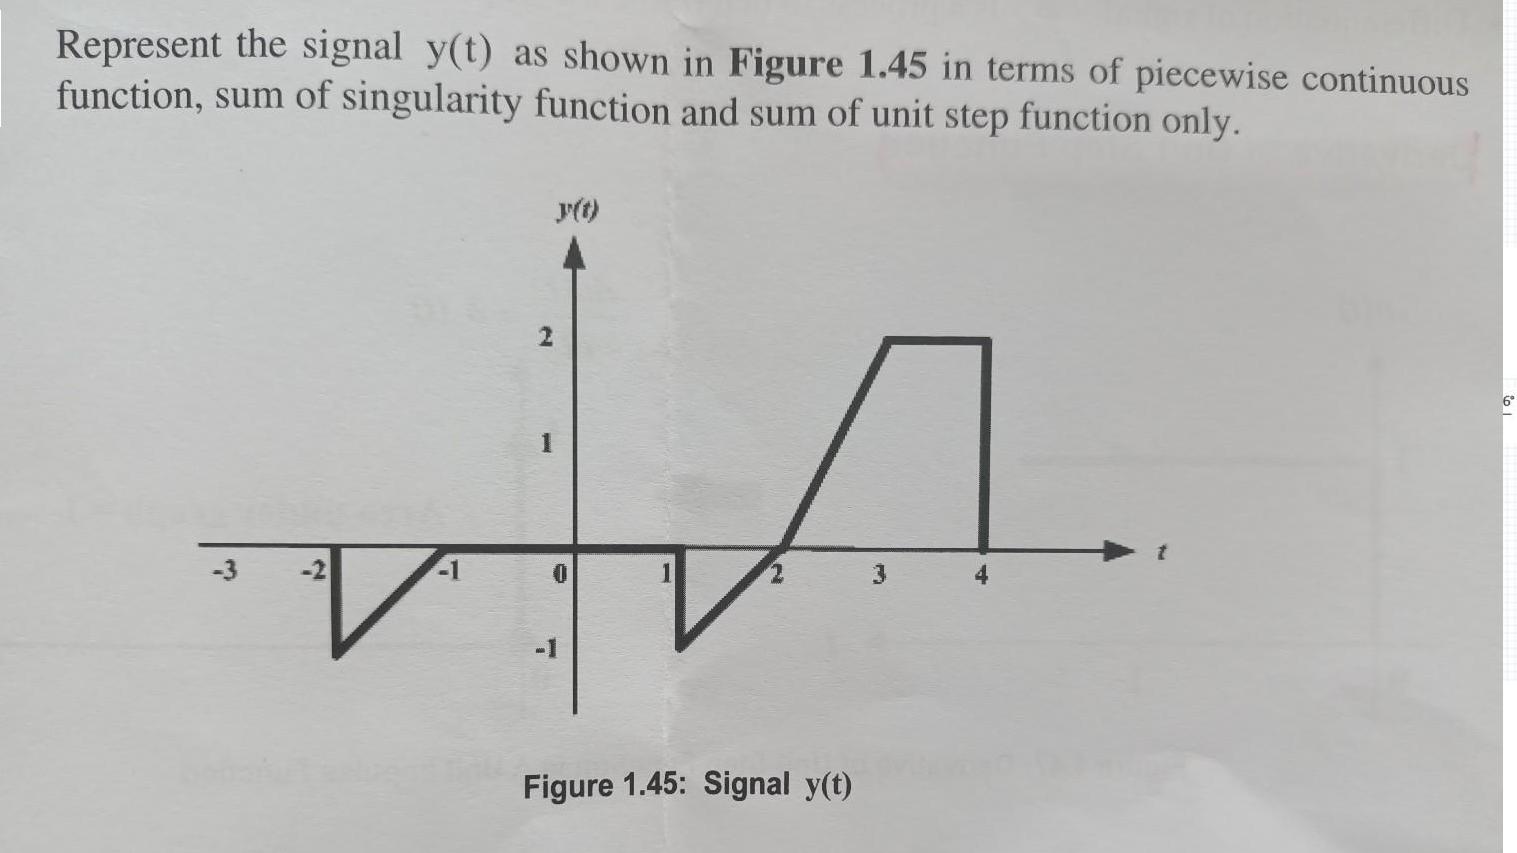 Represent the signal y(t) as shown in Figure 1.45 in terms of piecewise continuous function, sum of